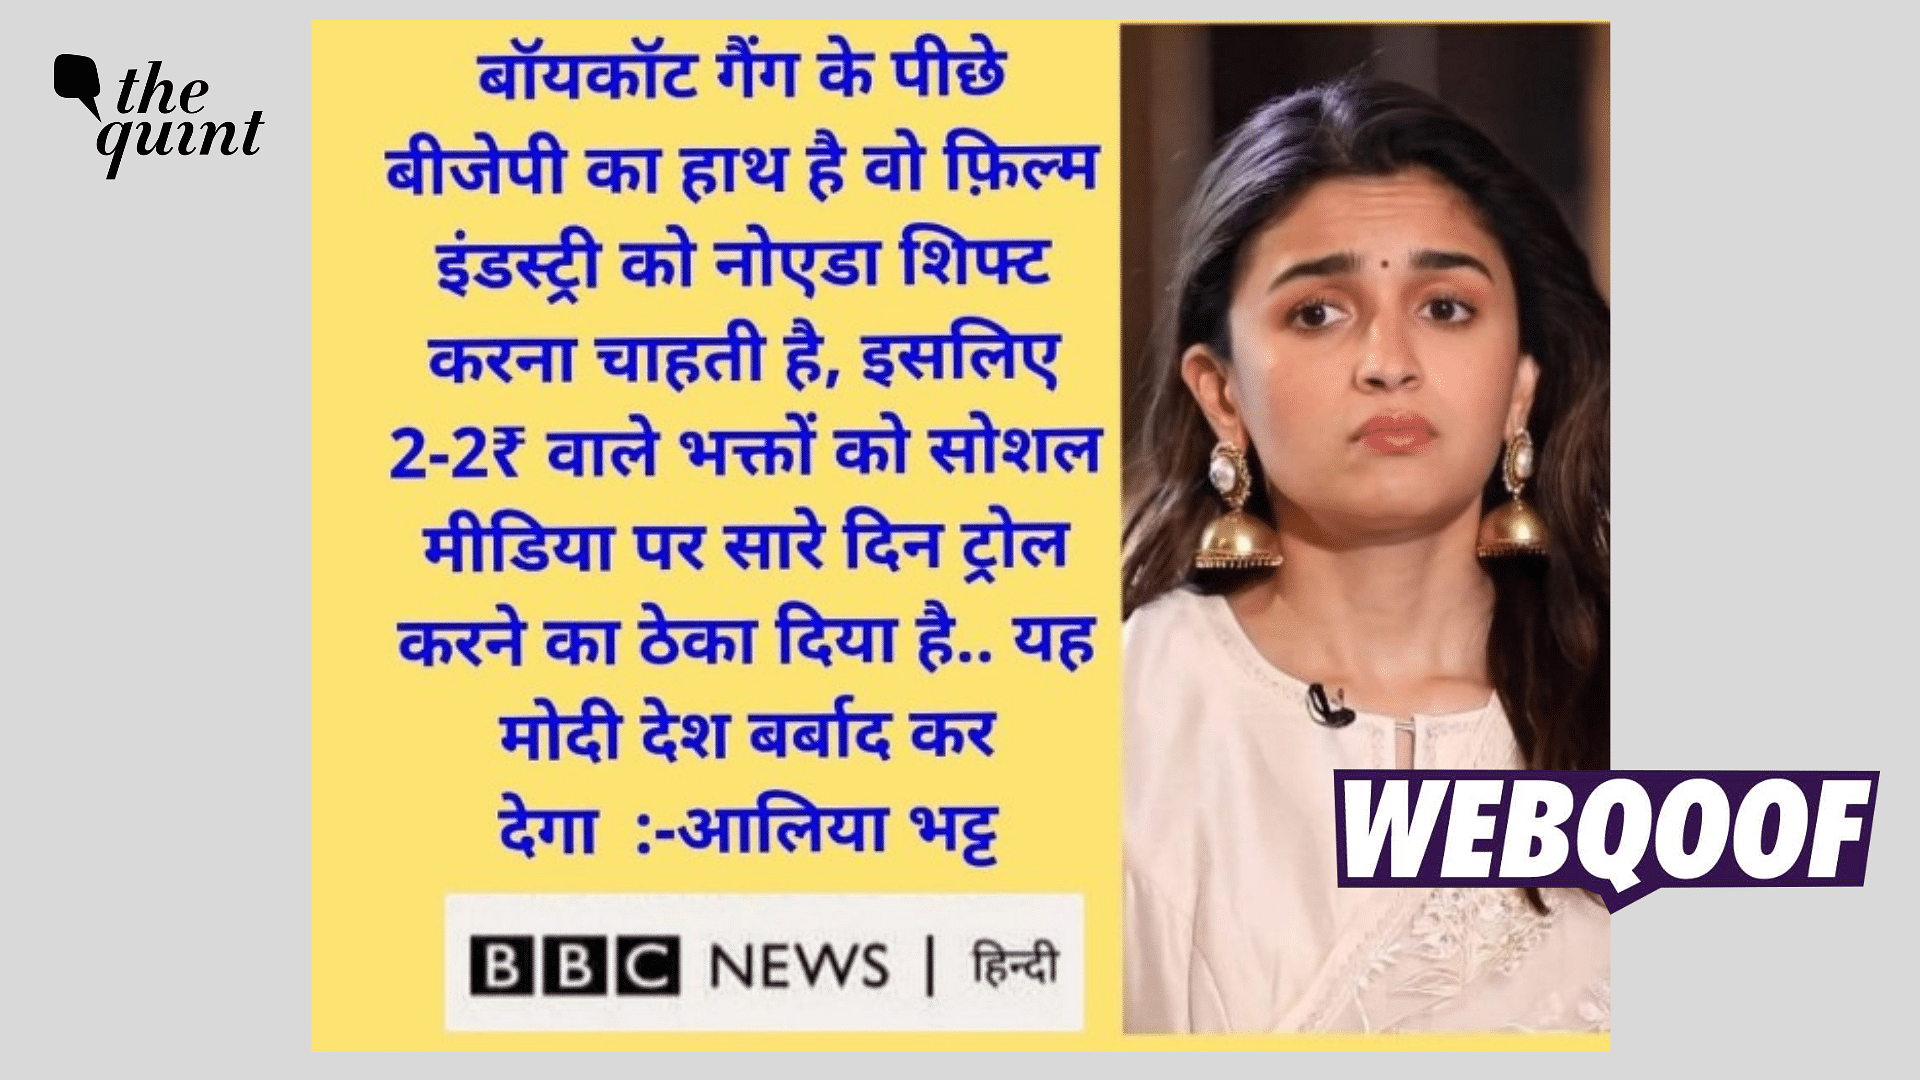 <div class="paragraphs"><p>Fact-check: The claim states that Alia Bhatt accused the BJP of starting the boycott trend in Bollywood.&nbsp;</p></div>